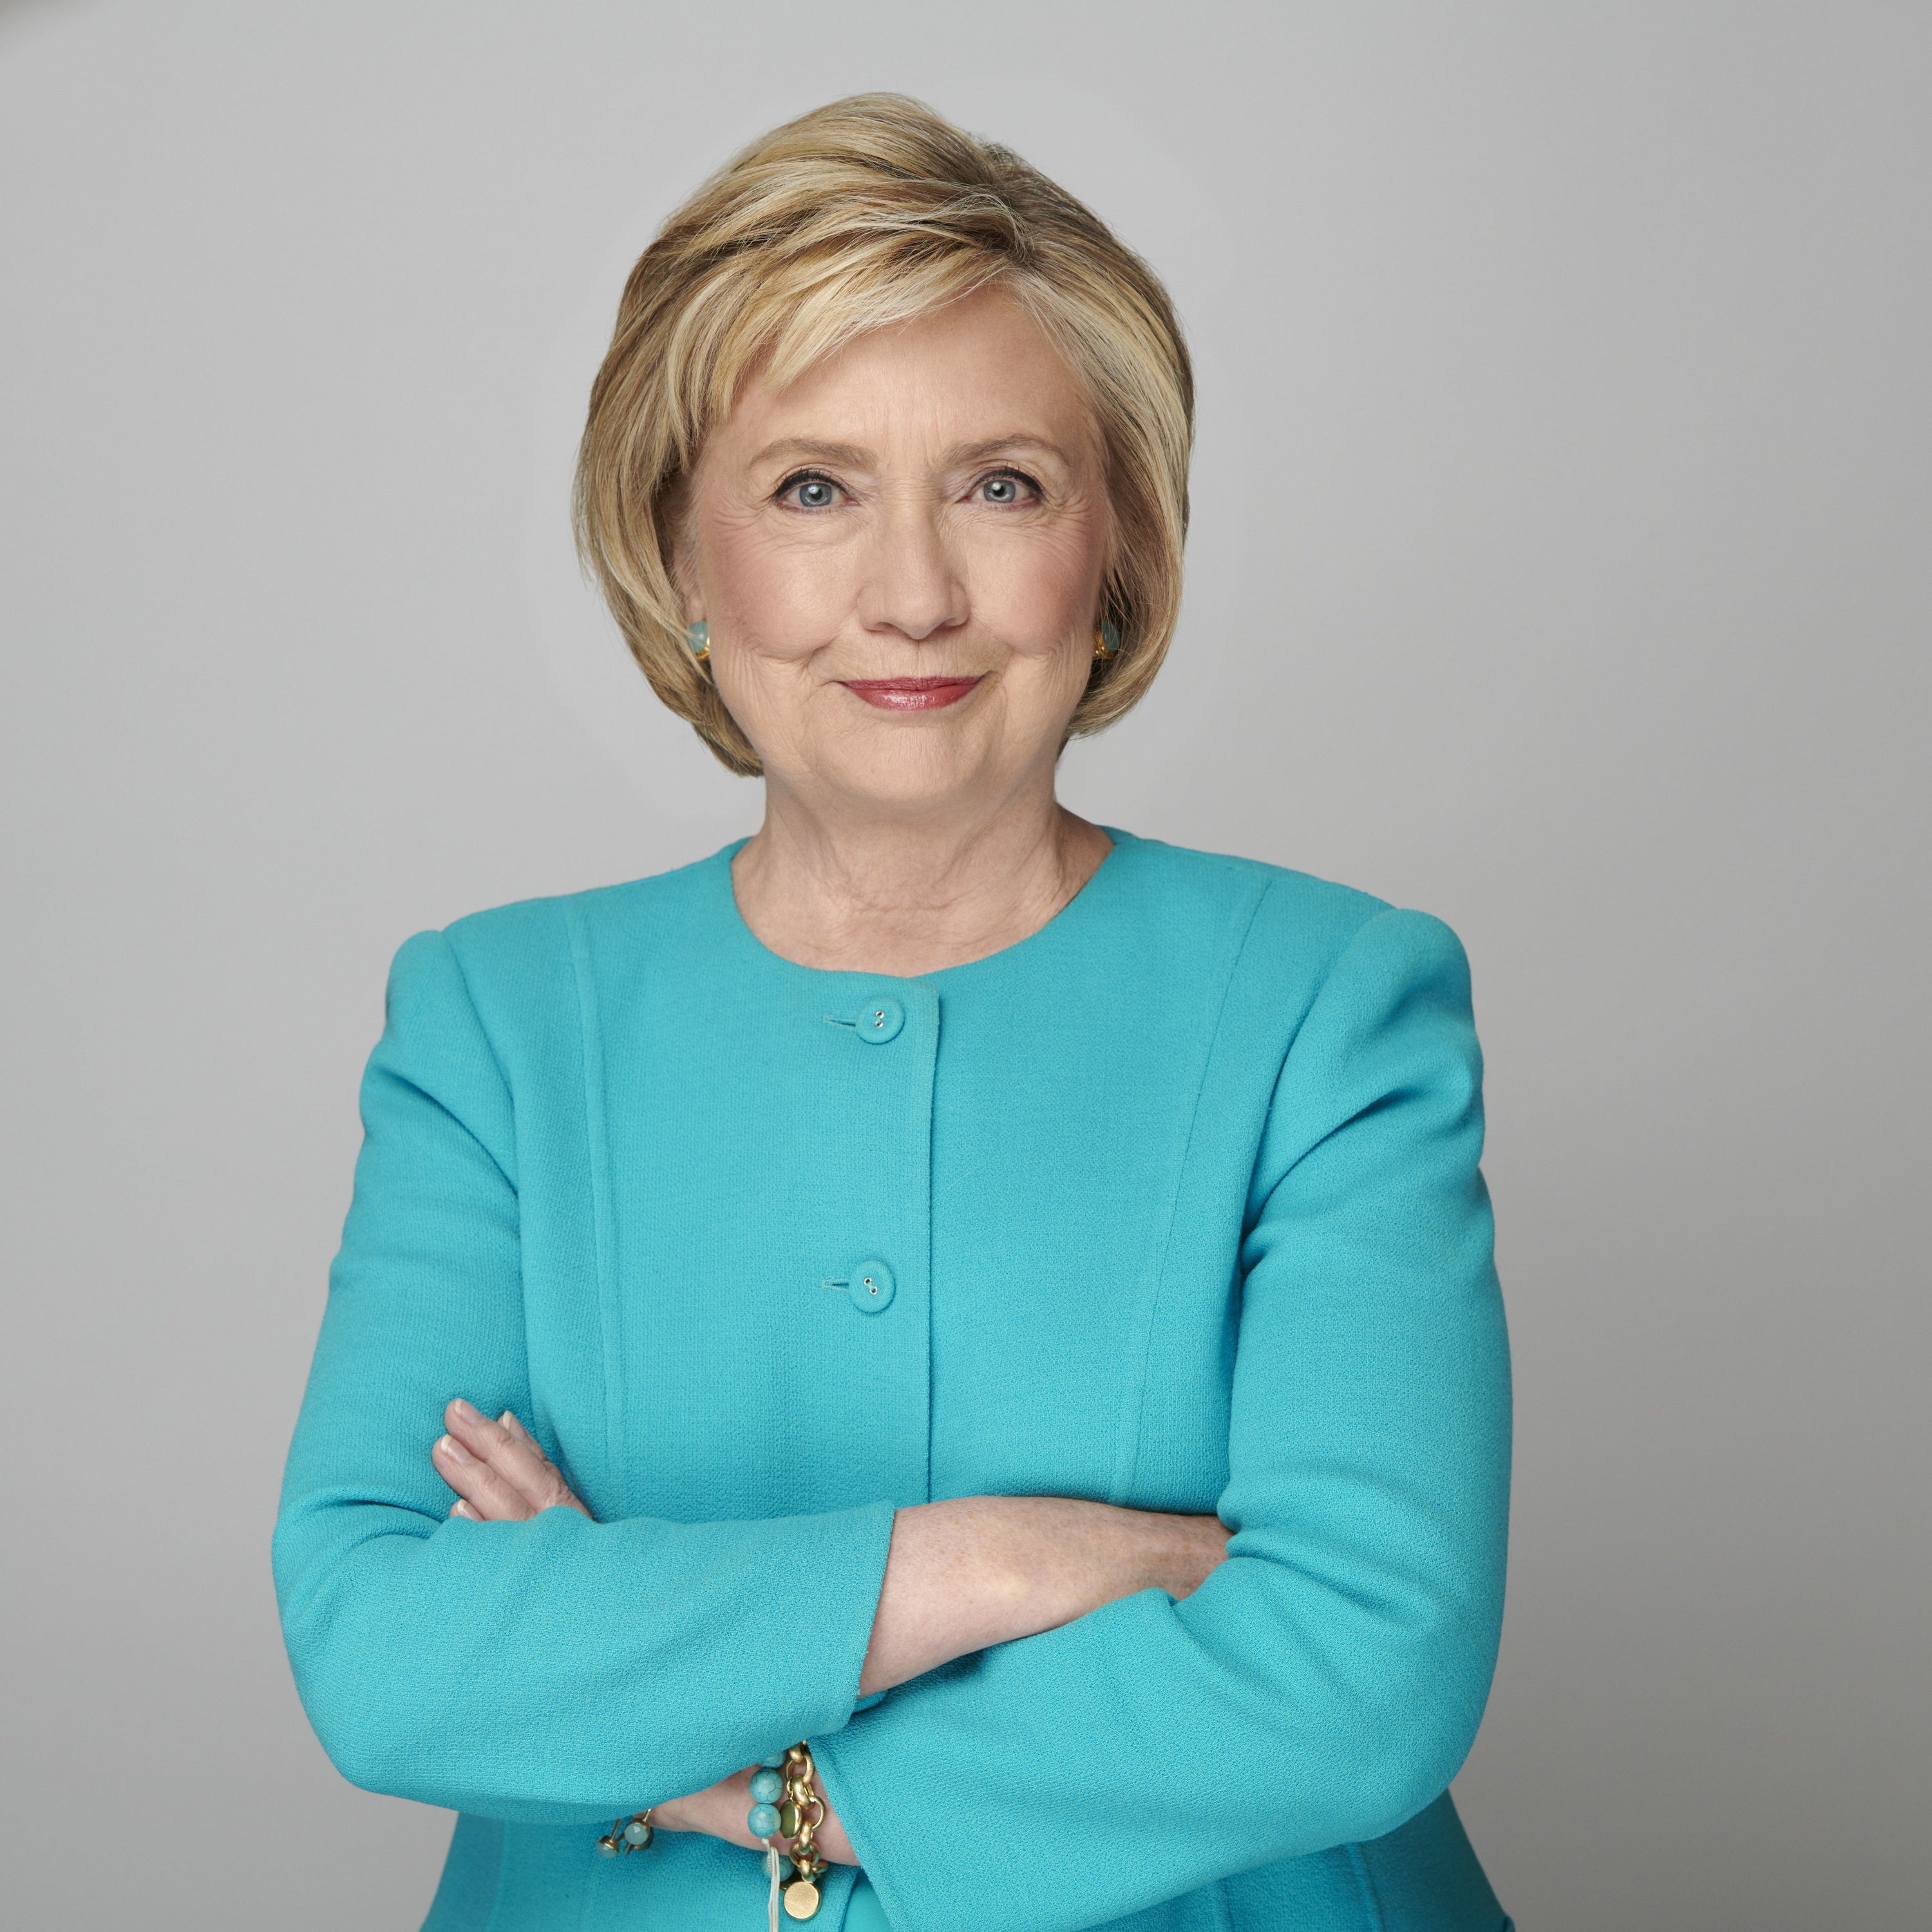 Hillary Clinton served as the First Lady of the United States to the 42nd President